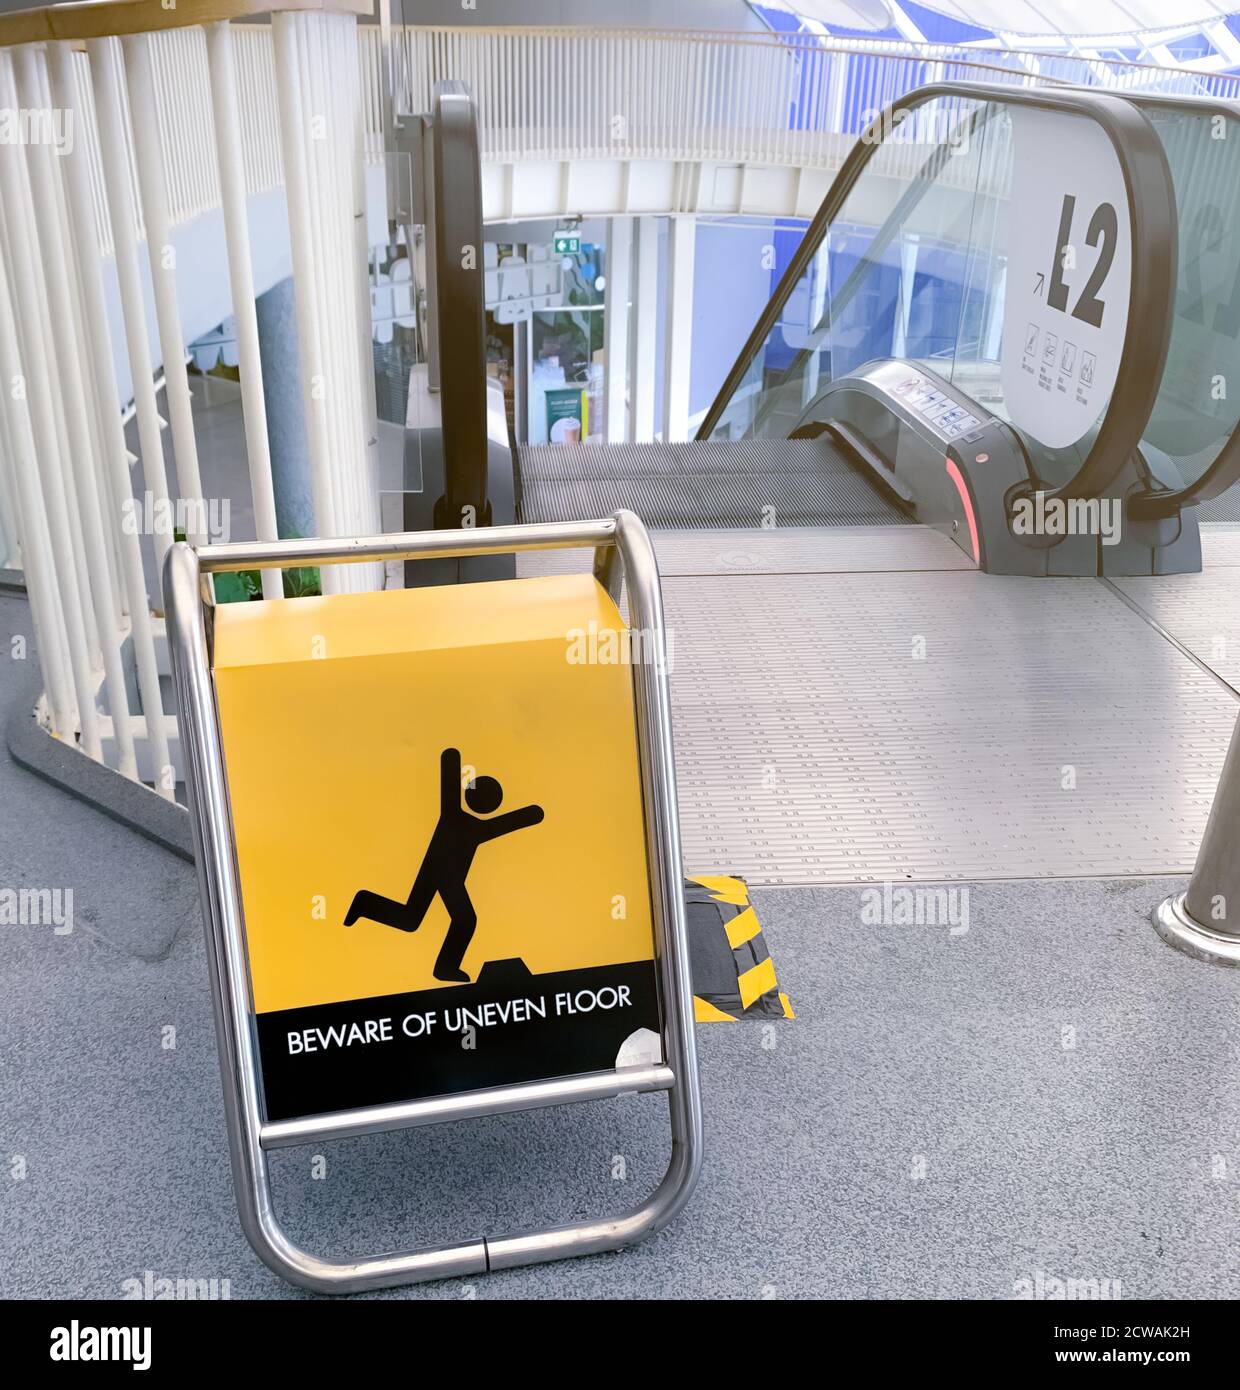 Beware uneven floor warning sign on yellow board in front of escalator in shopping mall. Beware uneven floor warning sign for safety at walkway before Stock Photo